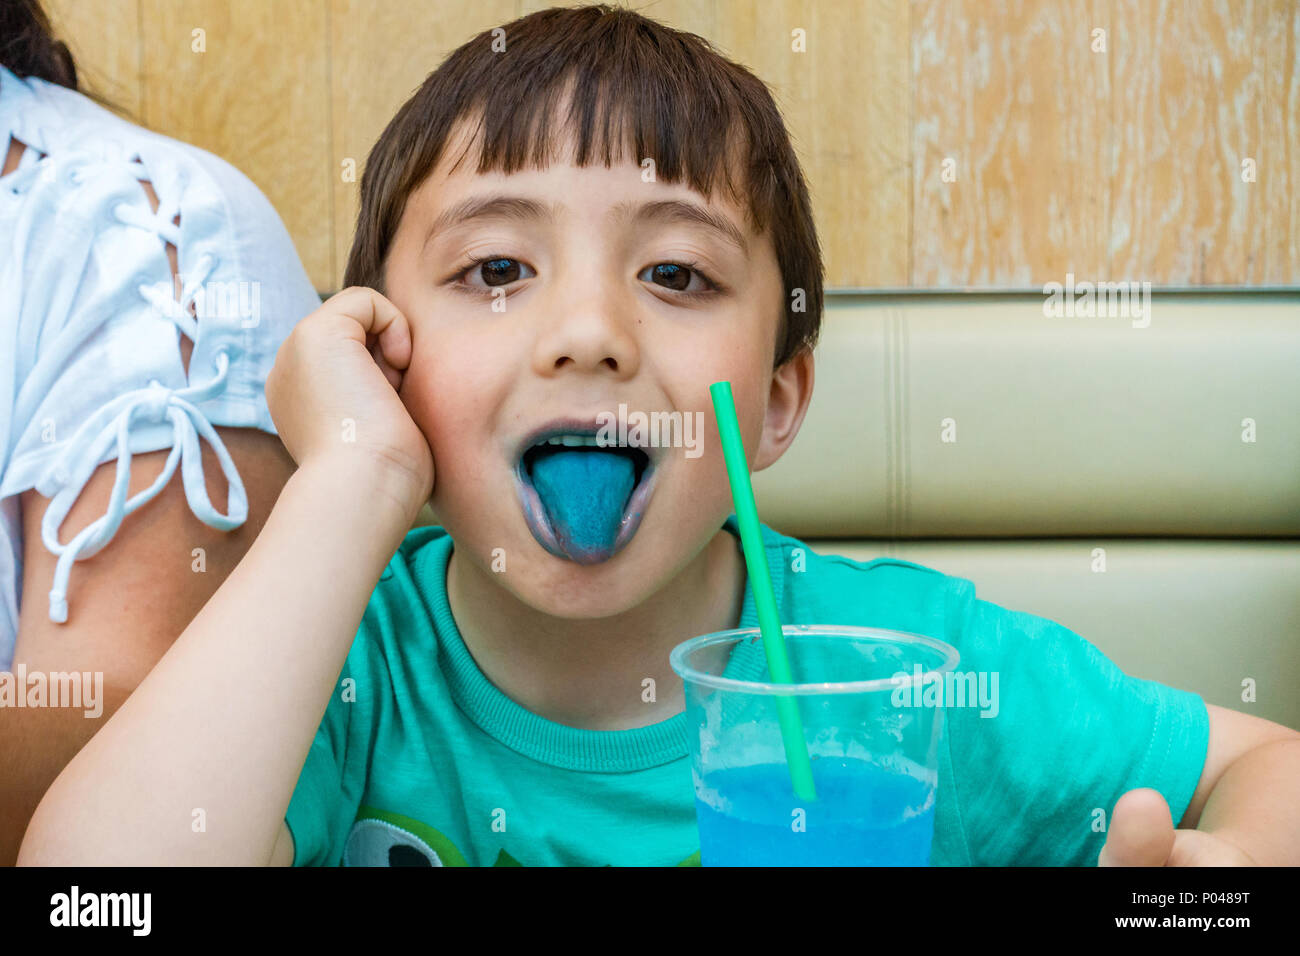 A young child shows his blue tongue after drinking a blue slushy drink Stock Photo